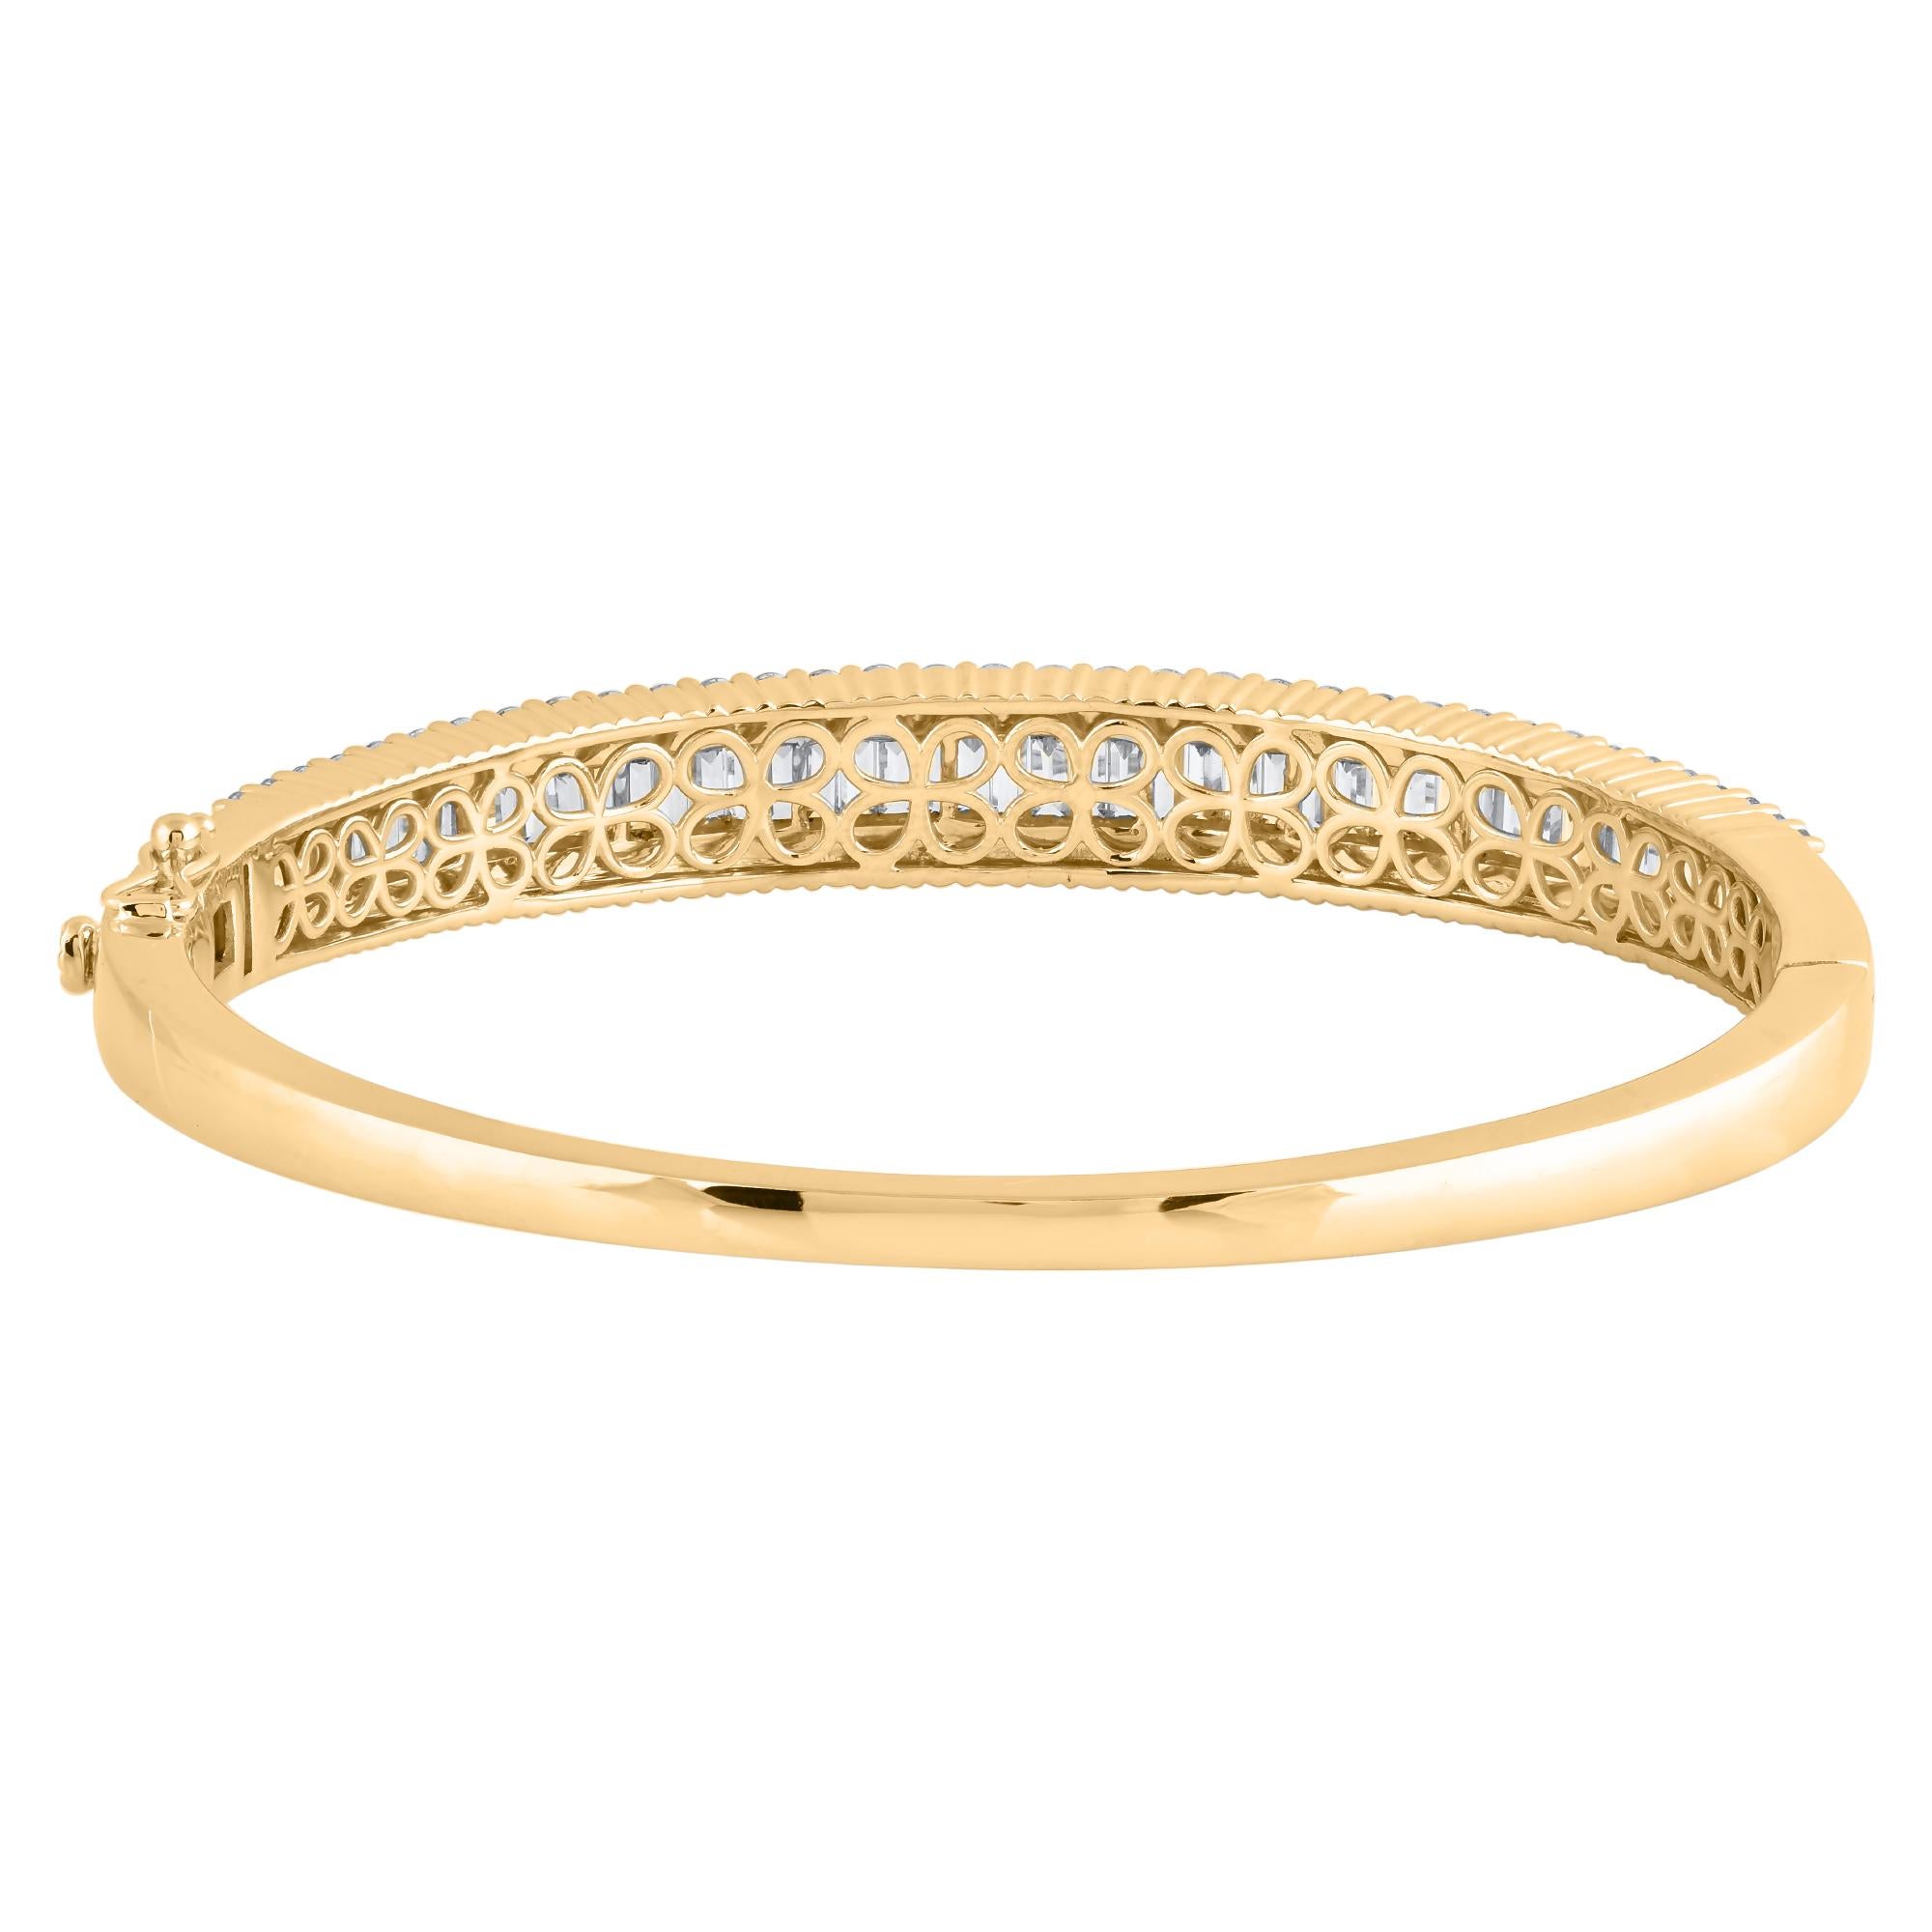 Baguette Cut TJD 5.0 Ct Natural Round & Baguette Diamond Bangle Bracelet in 14KT Yellow Gold For Sale